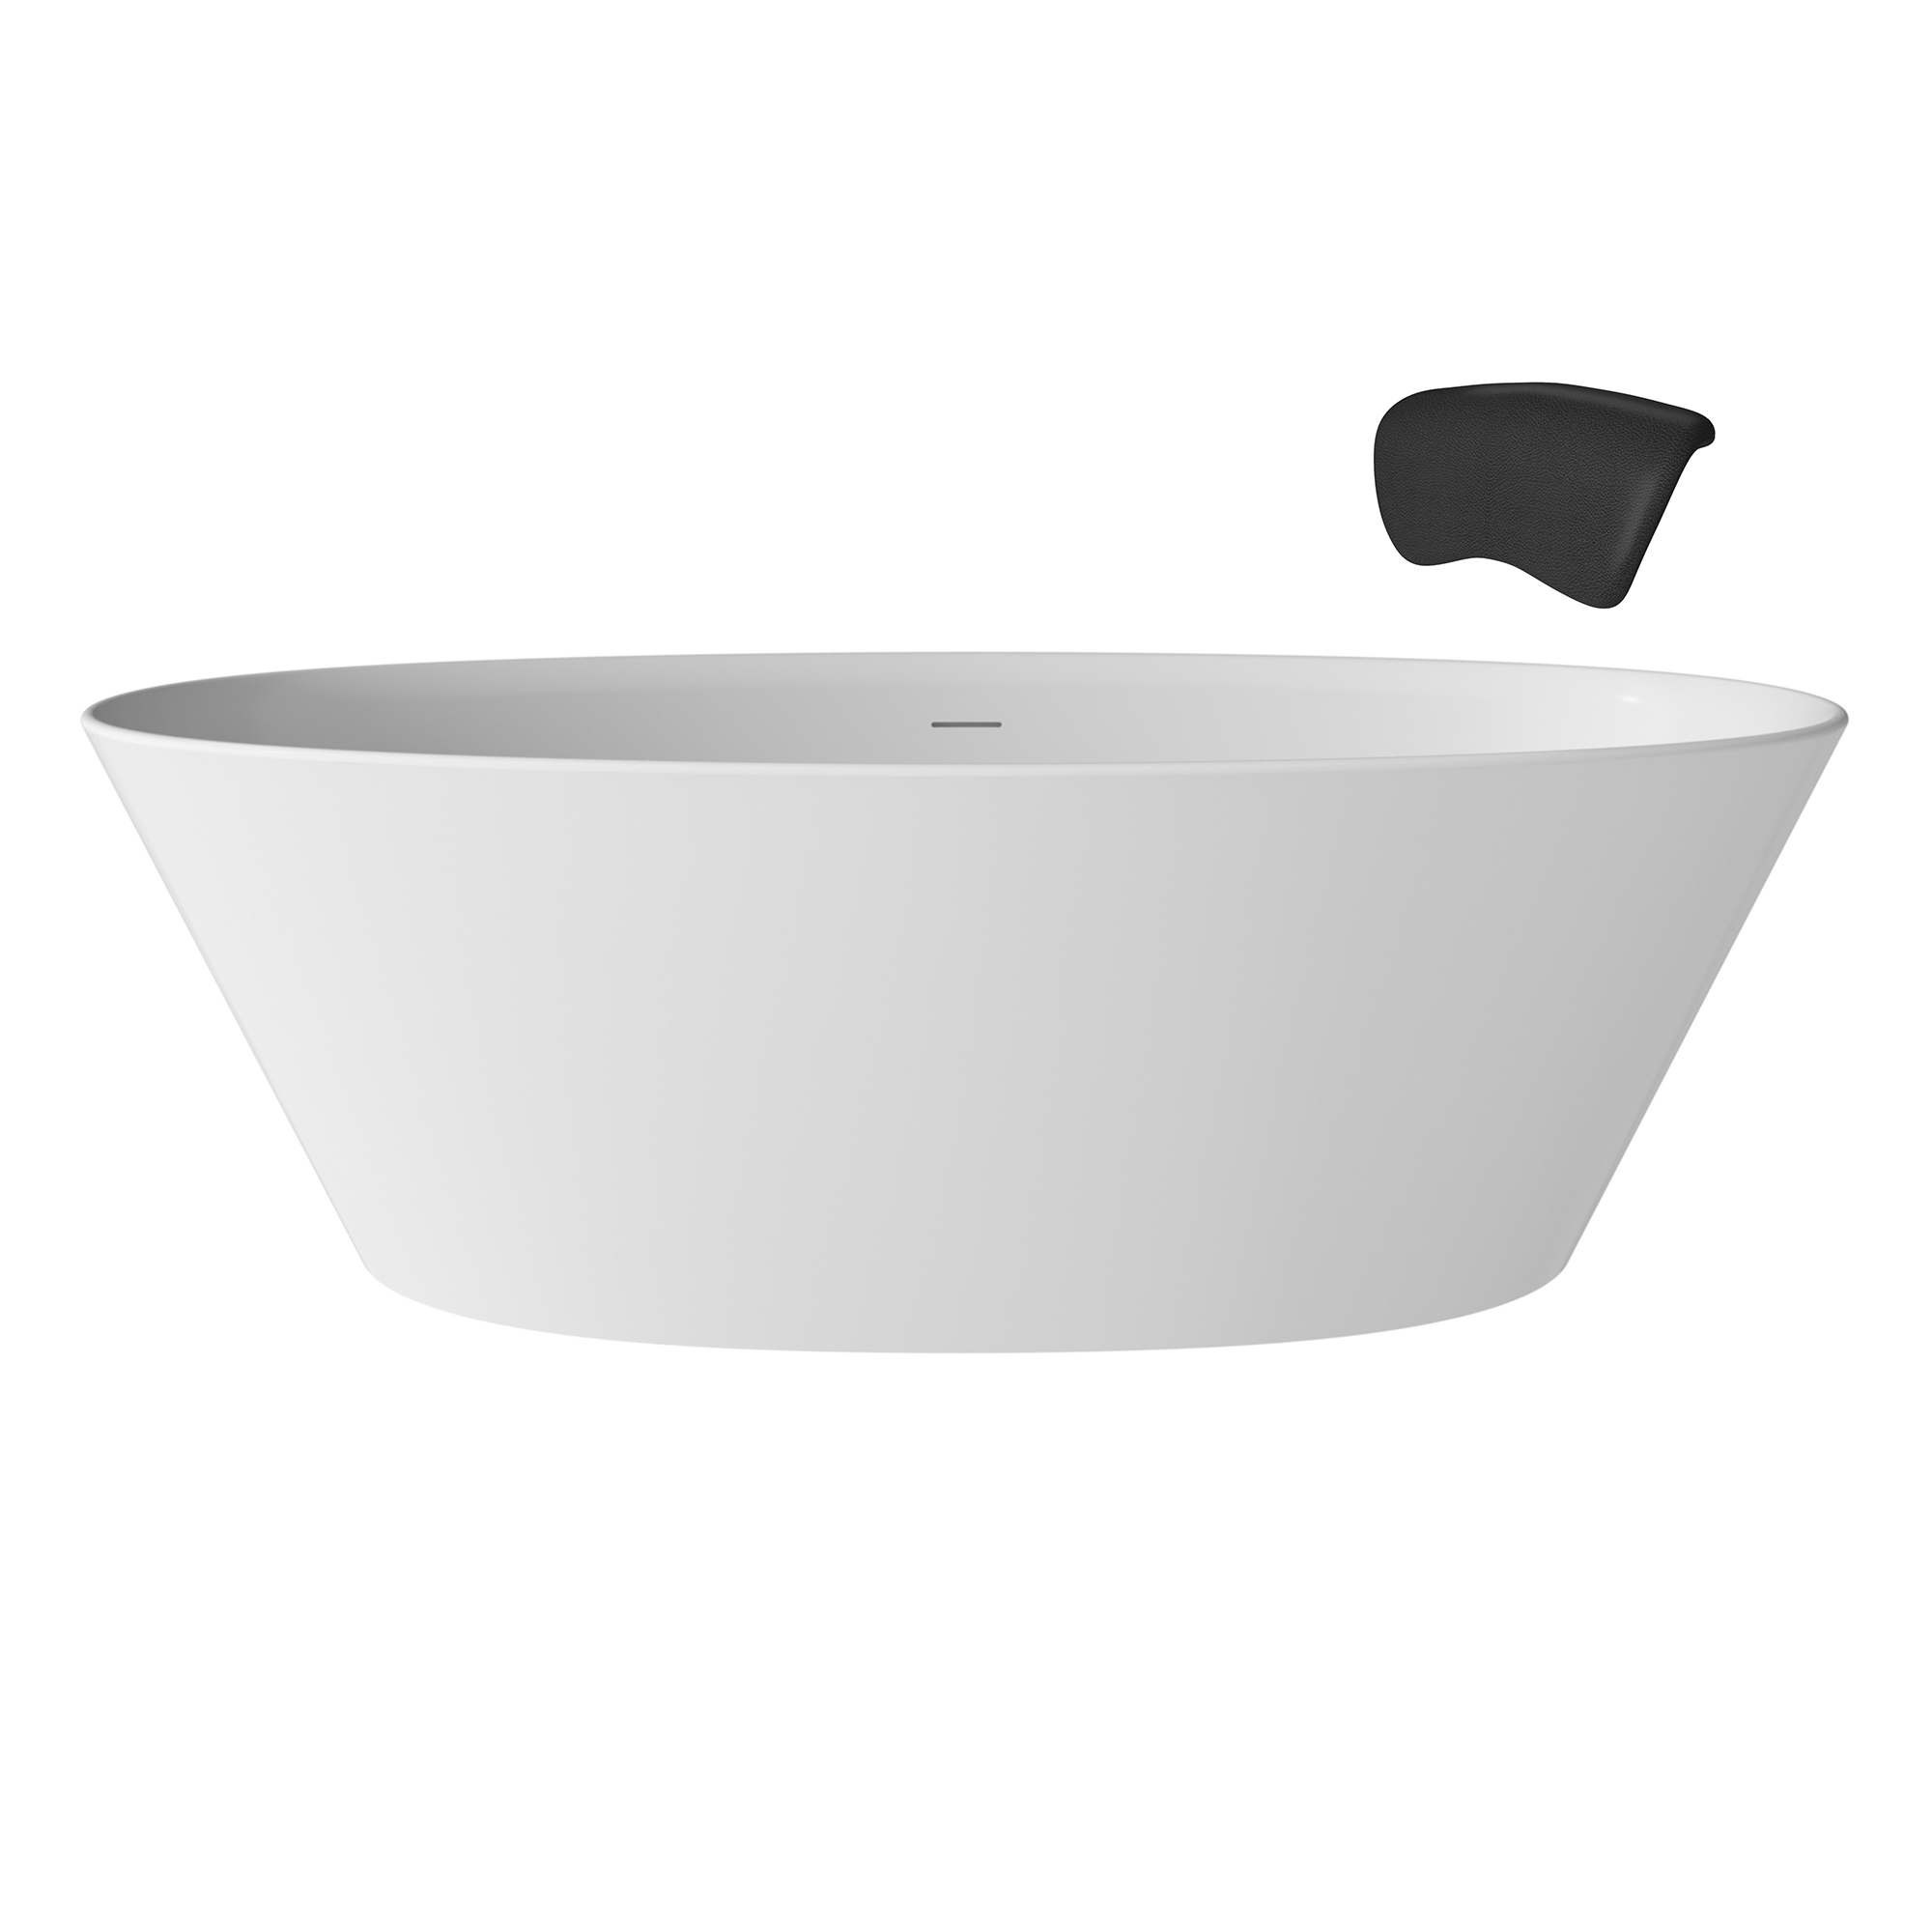 67" Matte White Stone Resin Adult Freestanding Soaking Tub with Cushions